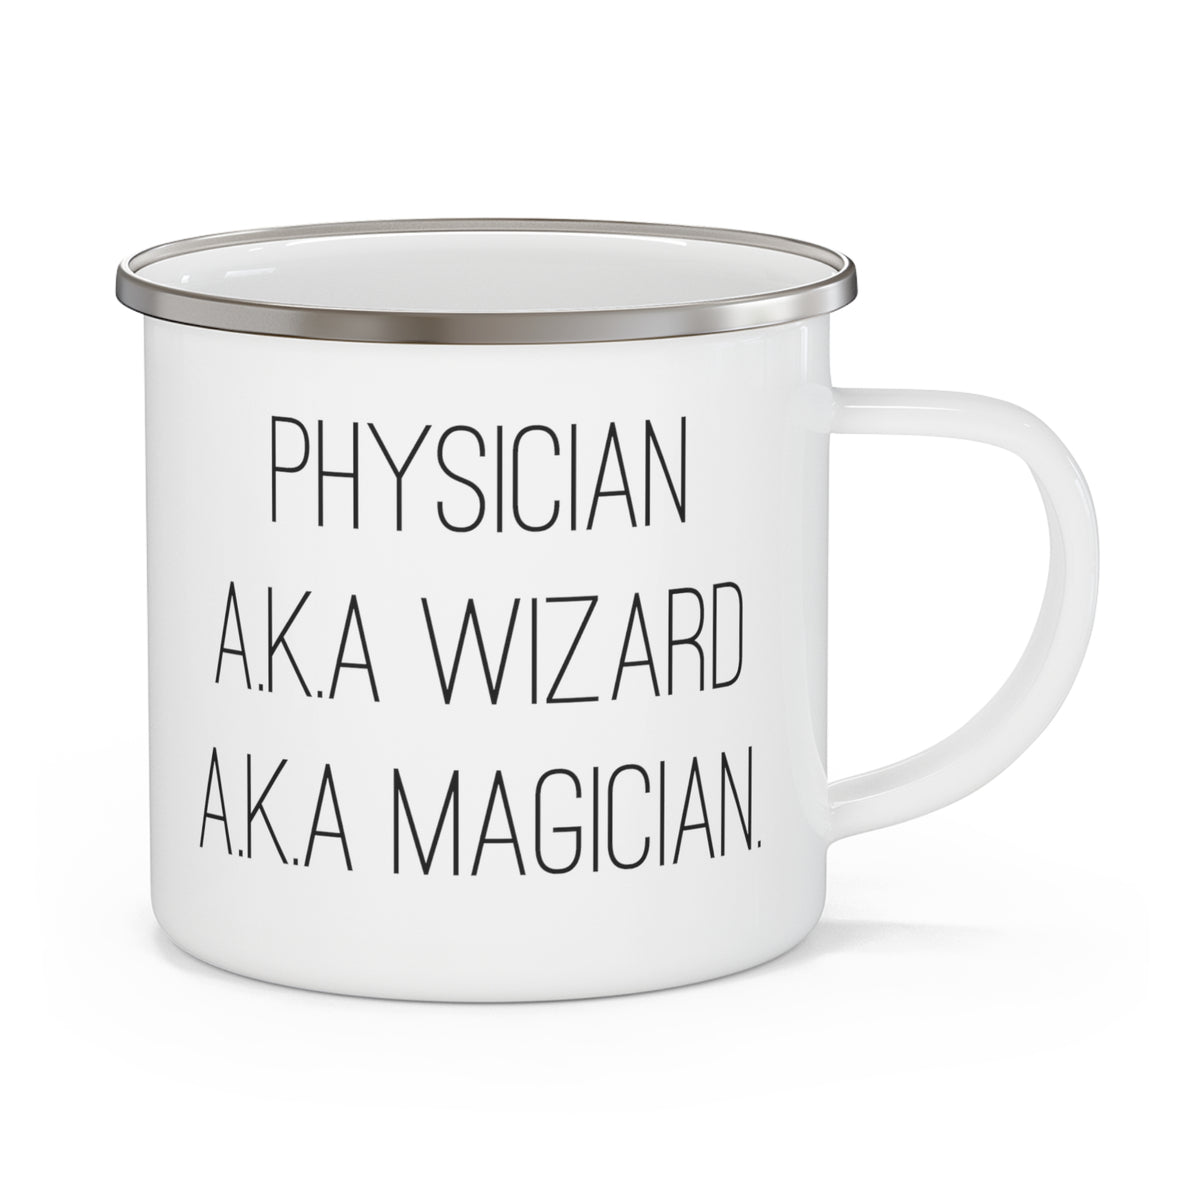 Perfect Physician Gifts, Physician A.K.A Wizard A.K.A Magician, Nice 12oz Camper Mug For Colleagues From, Funny physician, Gift for physician